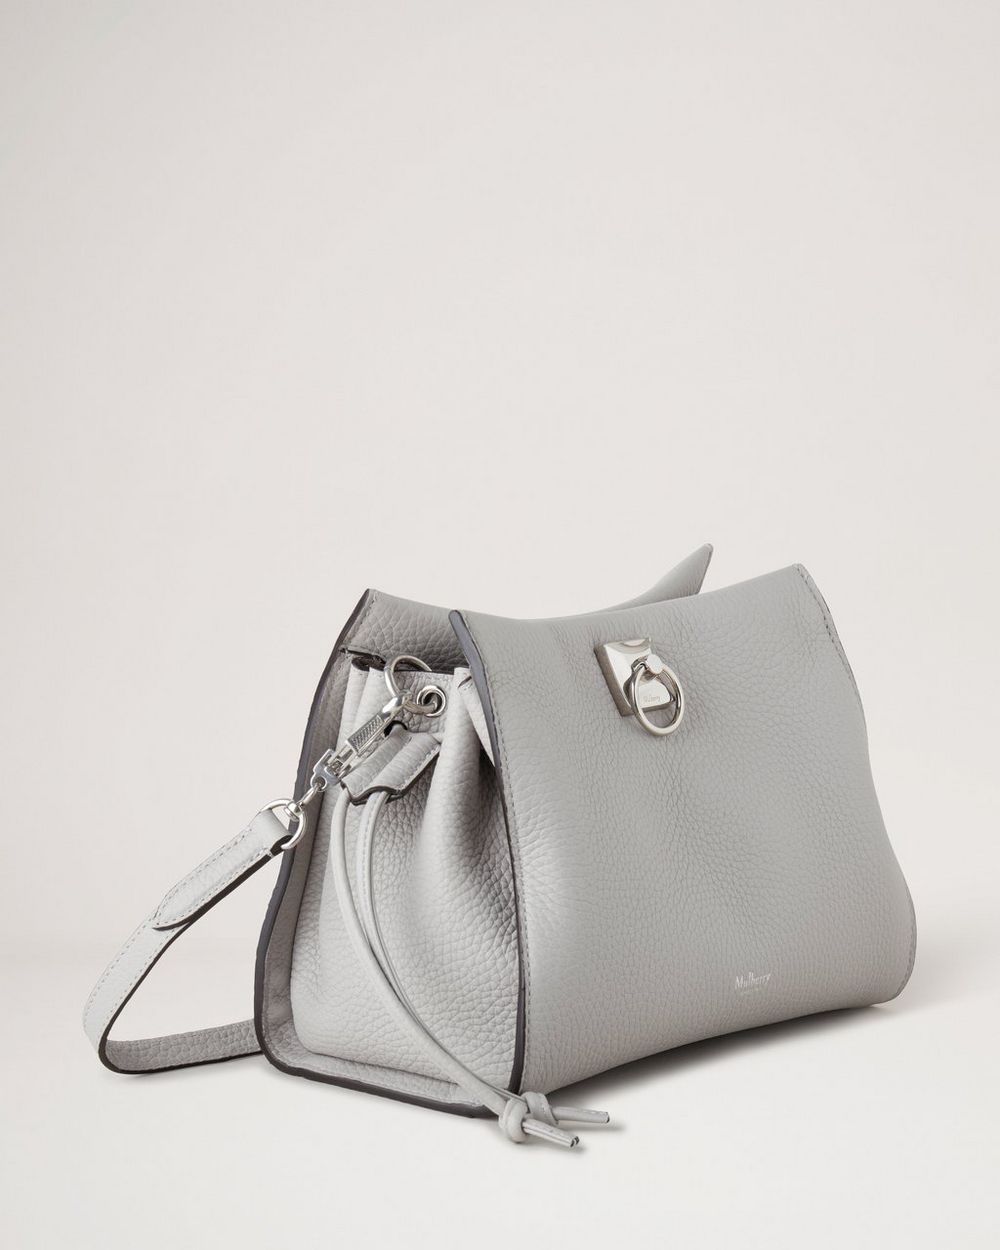 Mulberry Metallic Grey Leather Shoulder Bag Mulberry